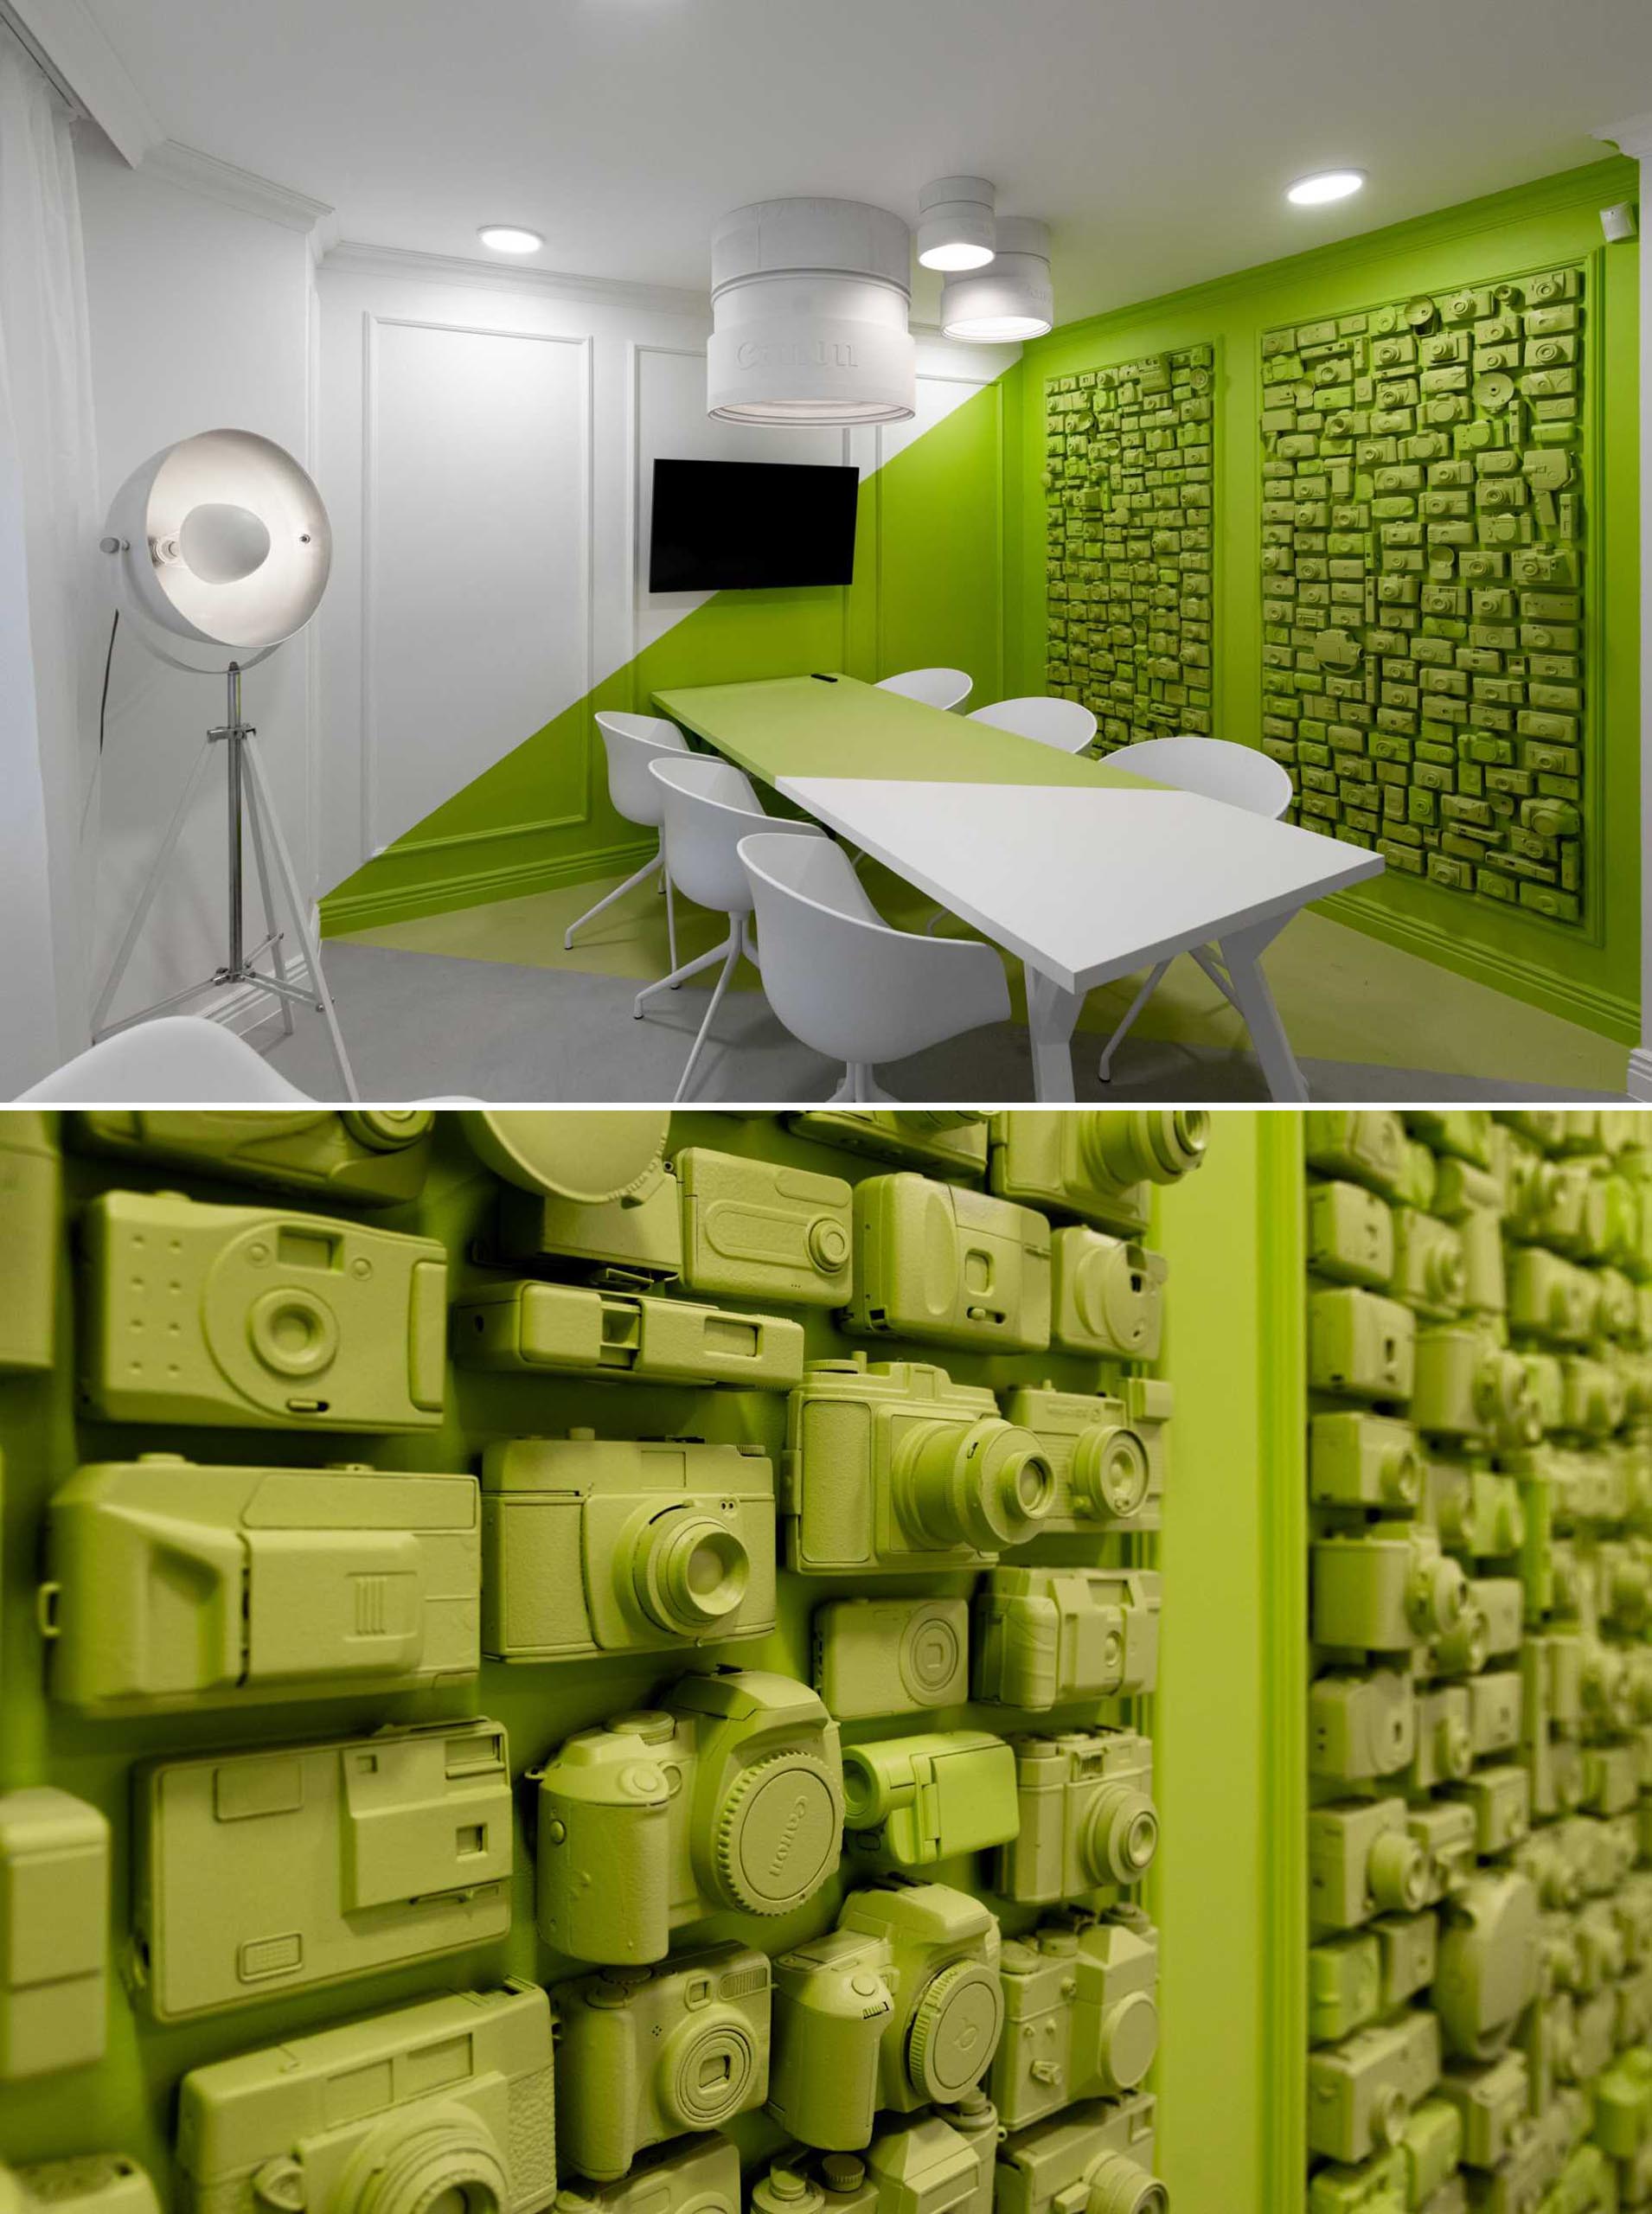 In this green meeting room, a wall featuring painted old cameras has been framed out as artwork, adding texture and interest to the room.